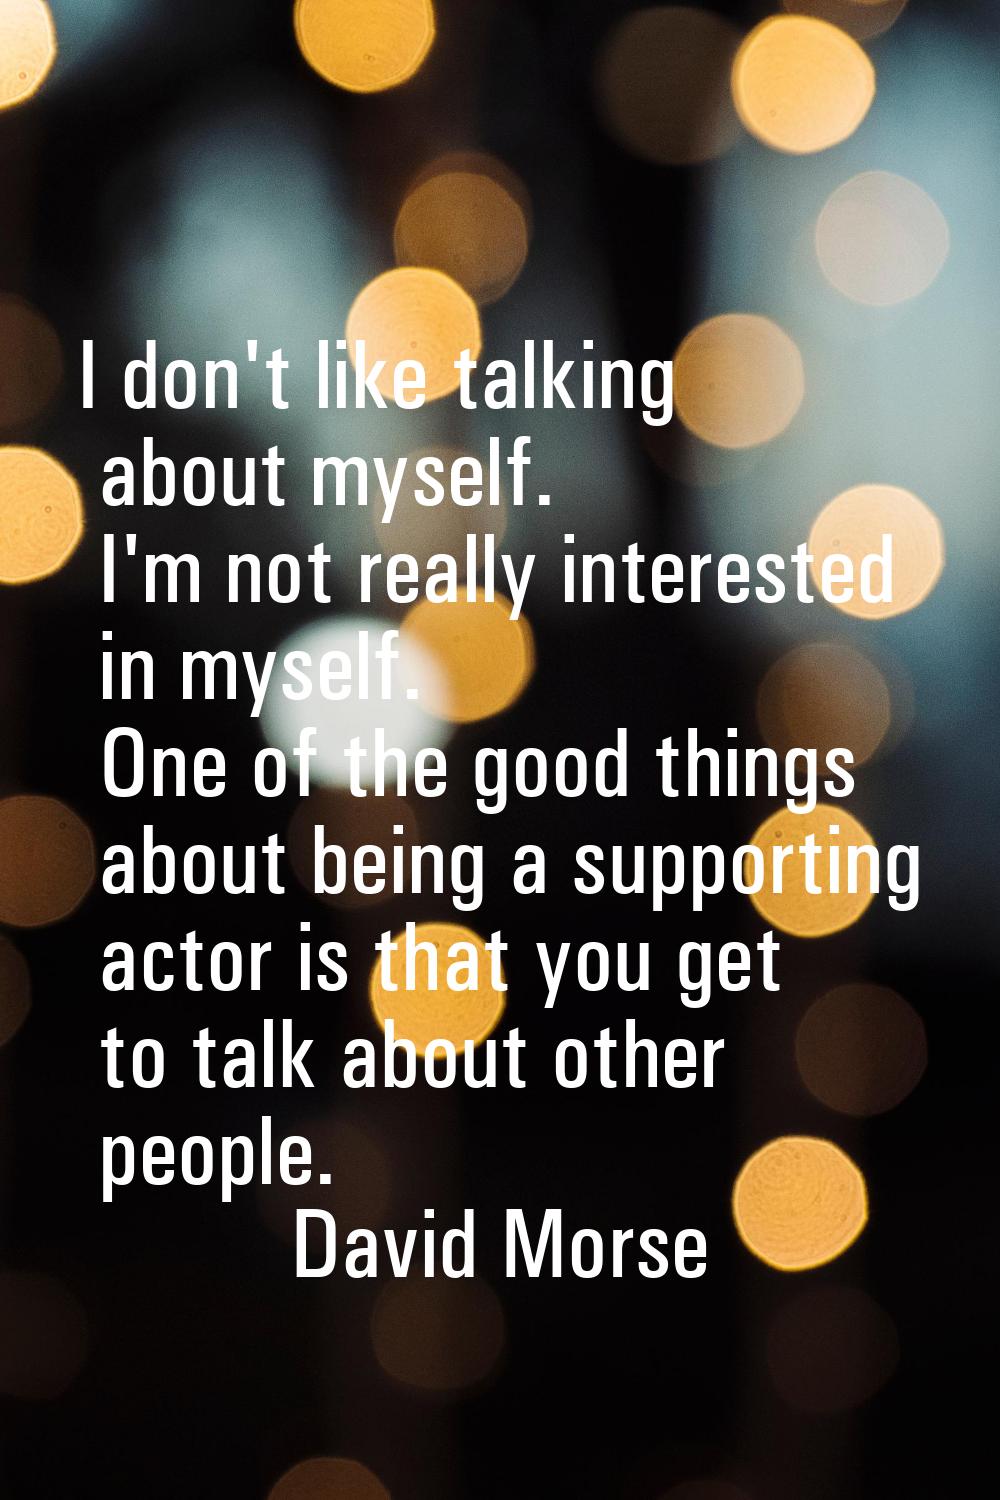 I don't like talking about myself. I'm not really interested in myself. One of the good things abou